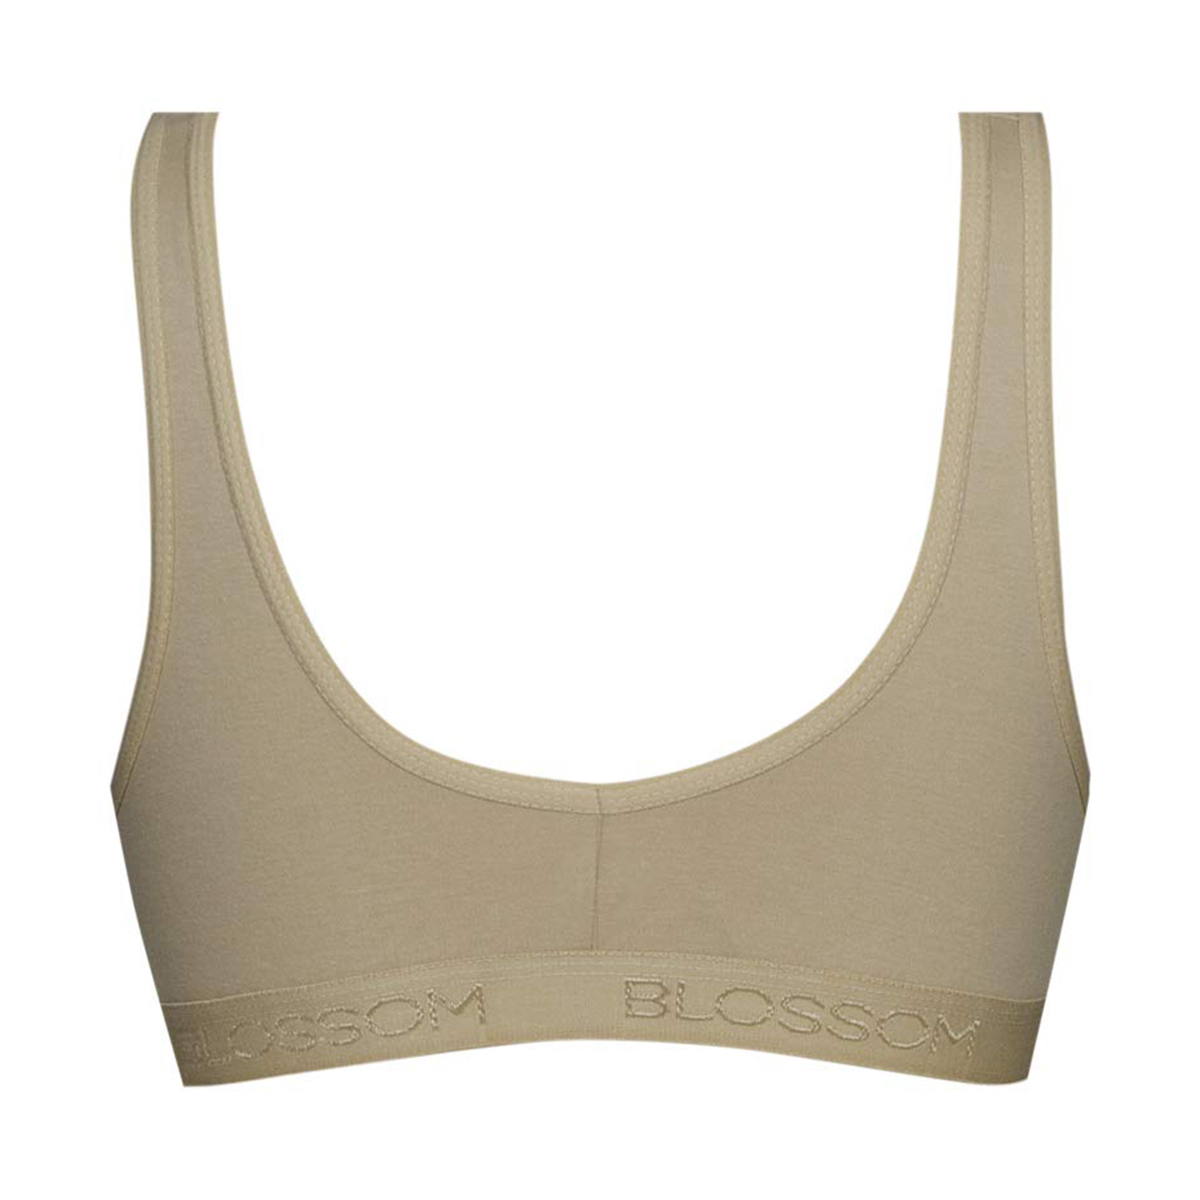 Buy Blossom Sports Bra Full coverage and comes with diagonal cut cups -  Skin Online - Lulu Hypermarket India